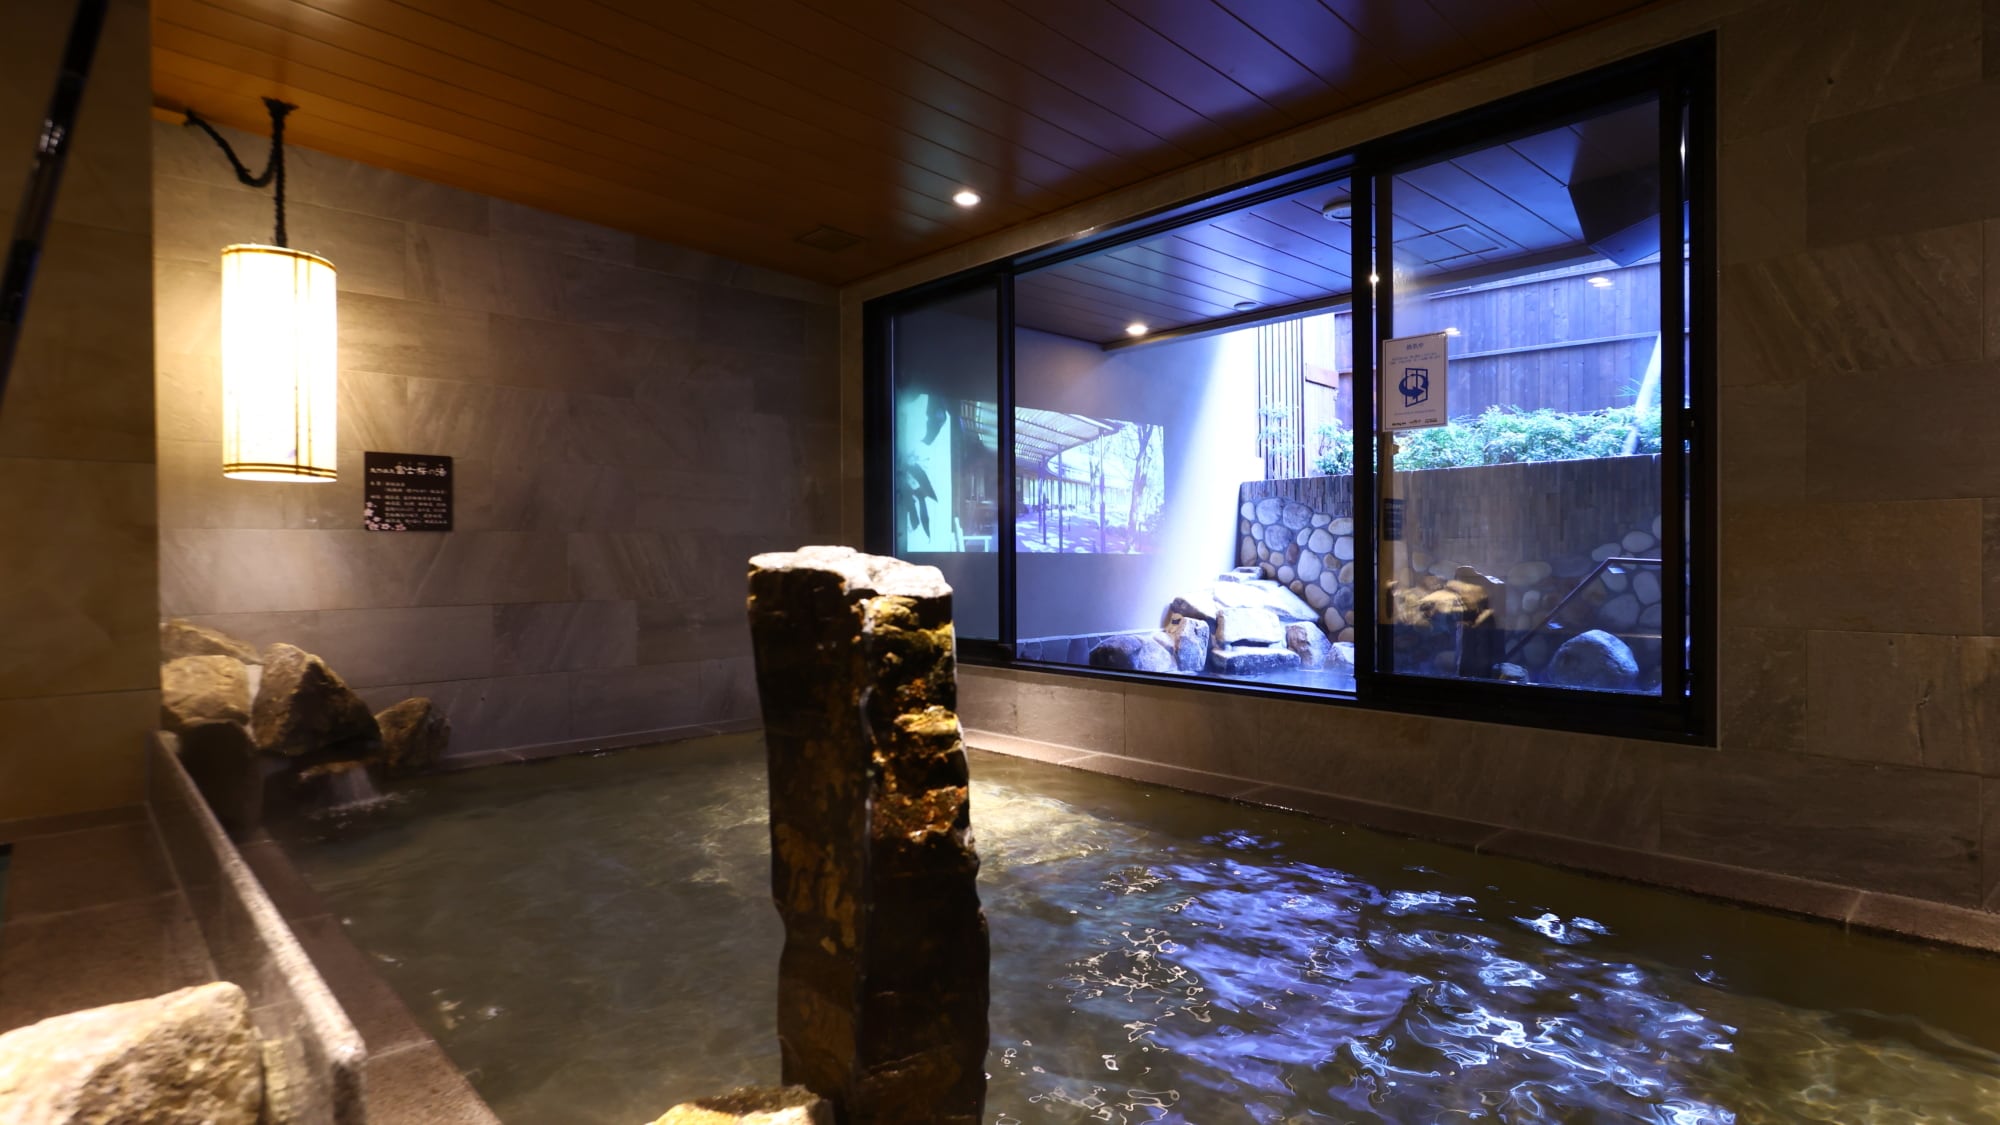 ■ Women's large communal bath Indoor bath [Opening hours] 15:00 to 10:00 the next day